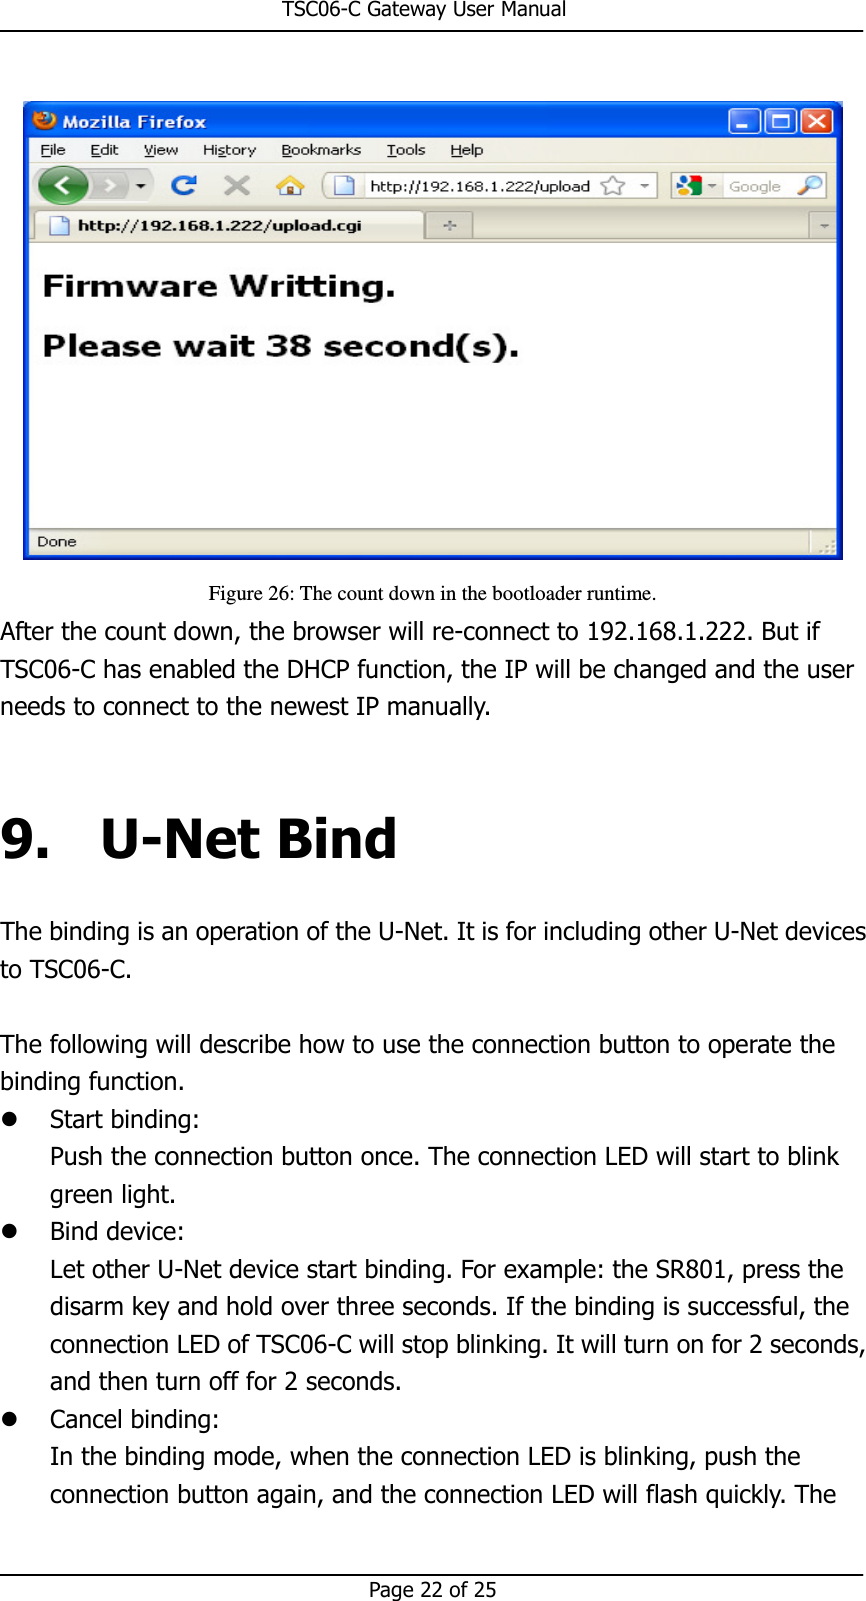                                                       TSC06-C Gateway User Manual   Page 22 of 25   Figure 26: The count down in the bootloader runtime. After the count down, the browser will re-connect to 192.168.1.222. But if TSC06-C has enabled the DHCP function, the IP will be changed and the user needs to connect to the newest IP manually.  9. U-Net Bind The binding is an operation of the U-Net. It is for including other U-Net devices to TSC06-C.  The following will describe how to use the connection button to operate the binding function.    Start binding:   Push the connection button once. The connection LED will start to blink green light.  Bind device: Let other U-Net device start binding. For example: the SR801, press the disarm key and hold over three seconds. If the binding is successful, the connection LED of TSC06-C will stop blinking. It will turn on for 2 seconds, and then turn off for 2 seconds.  Cancel binding: In the binding mode, when the connection LED is blinking, push the connection button again, and the connection LED will flash quickly. The 